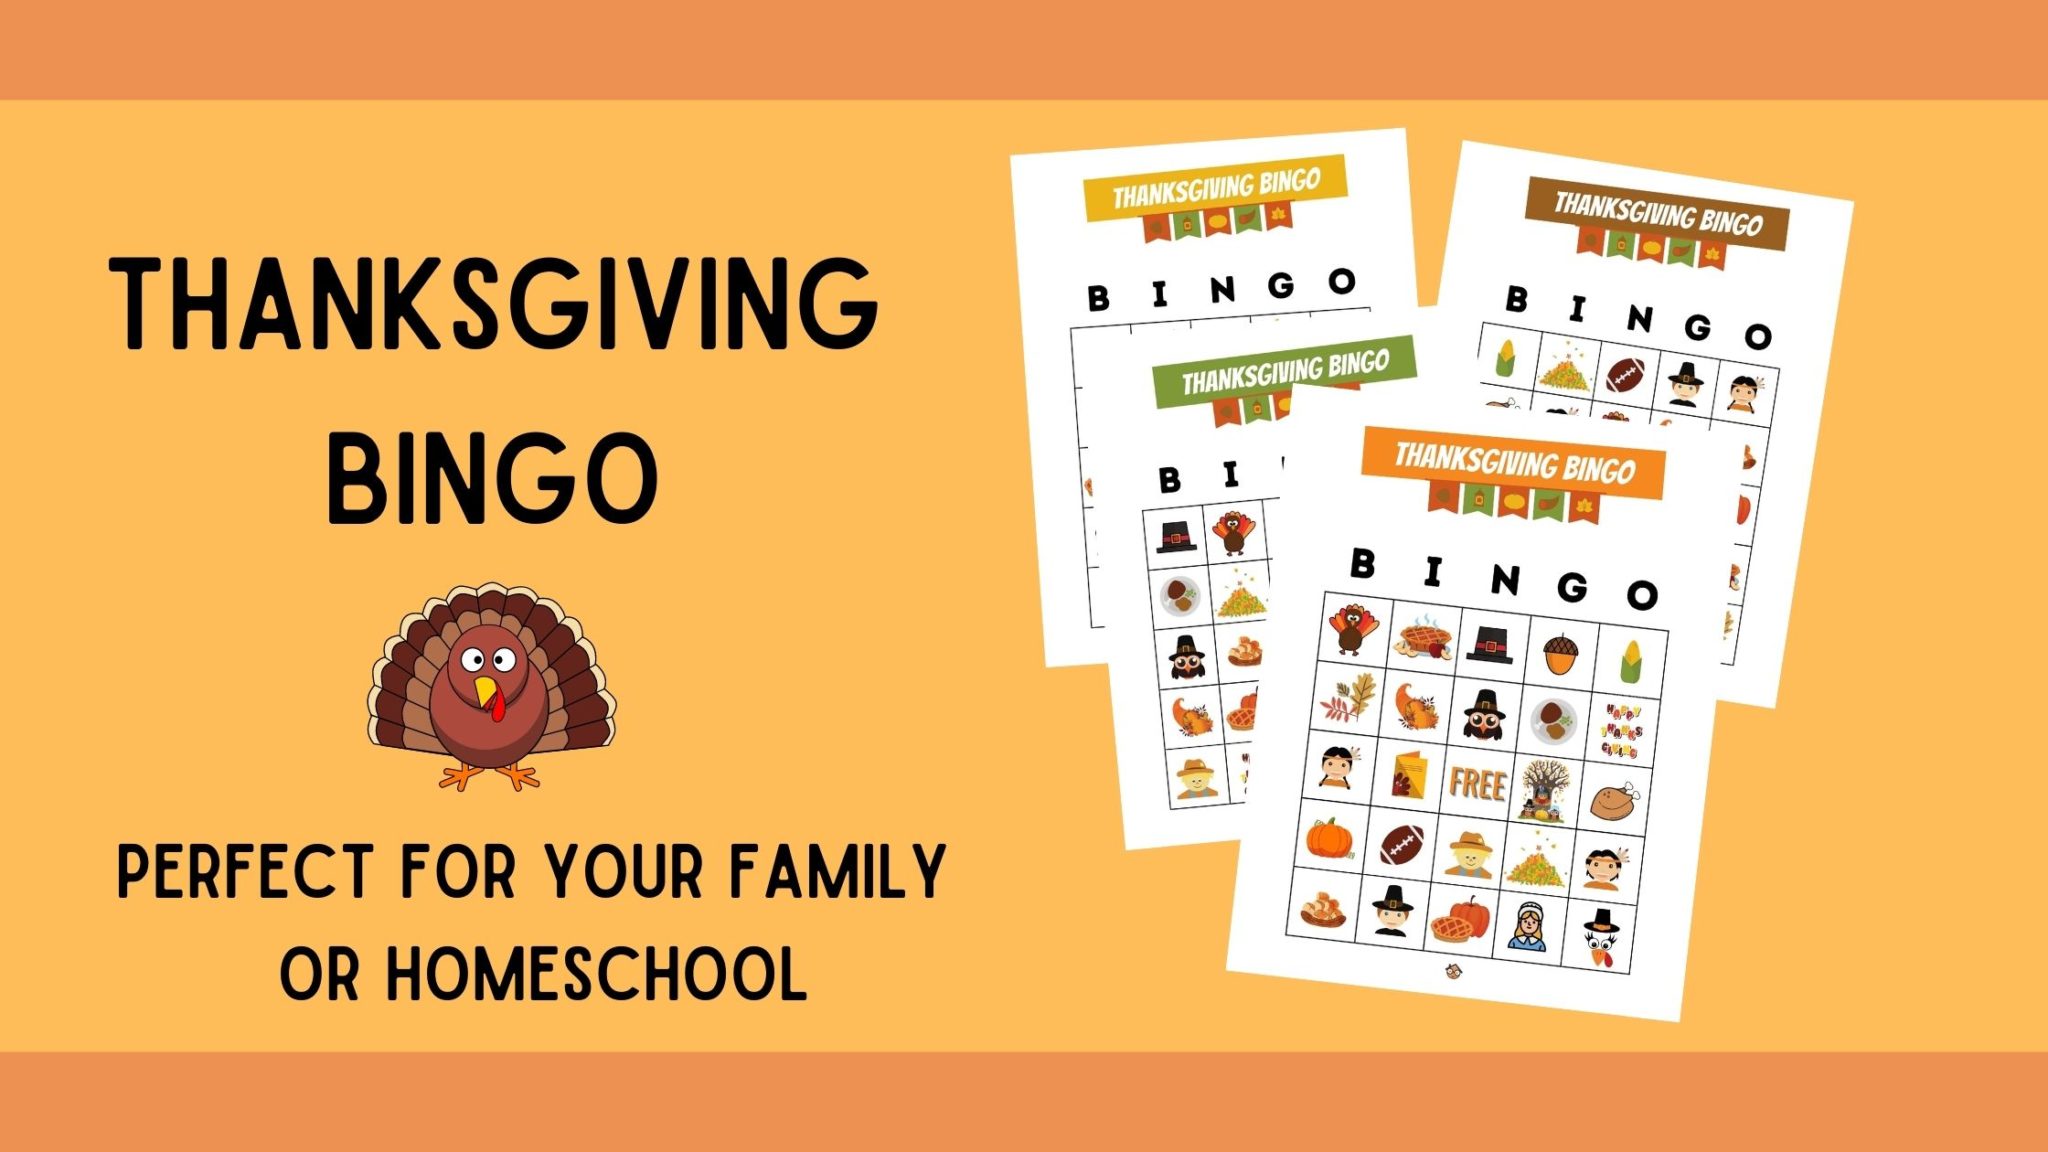 You are currently viewing Thanksgiving BINGO: A Fun Game for Your Family or Homeschool